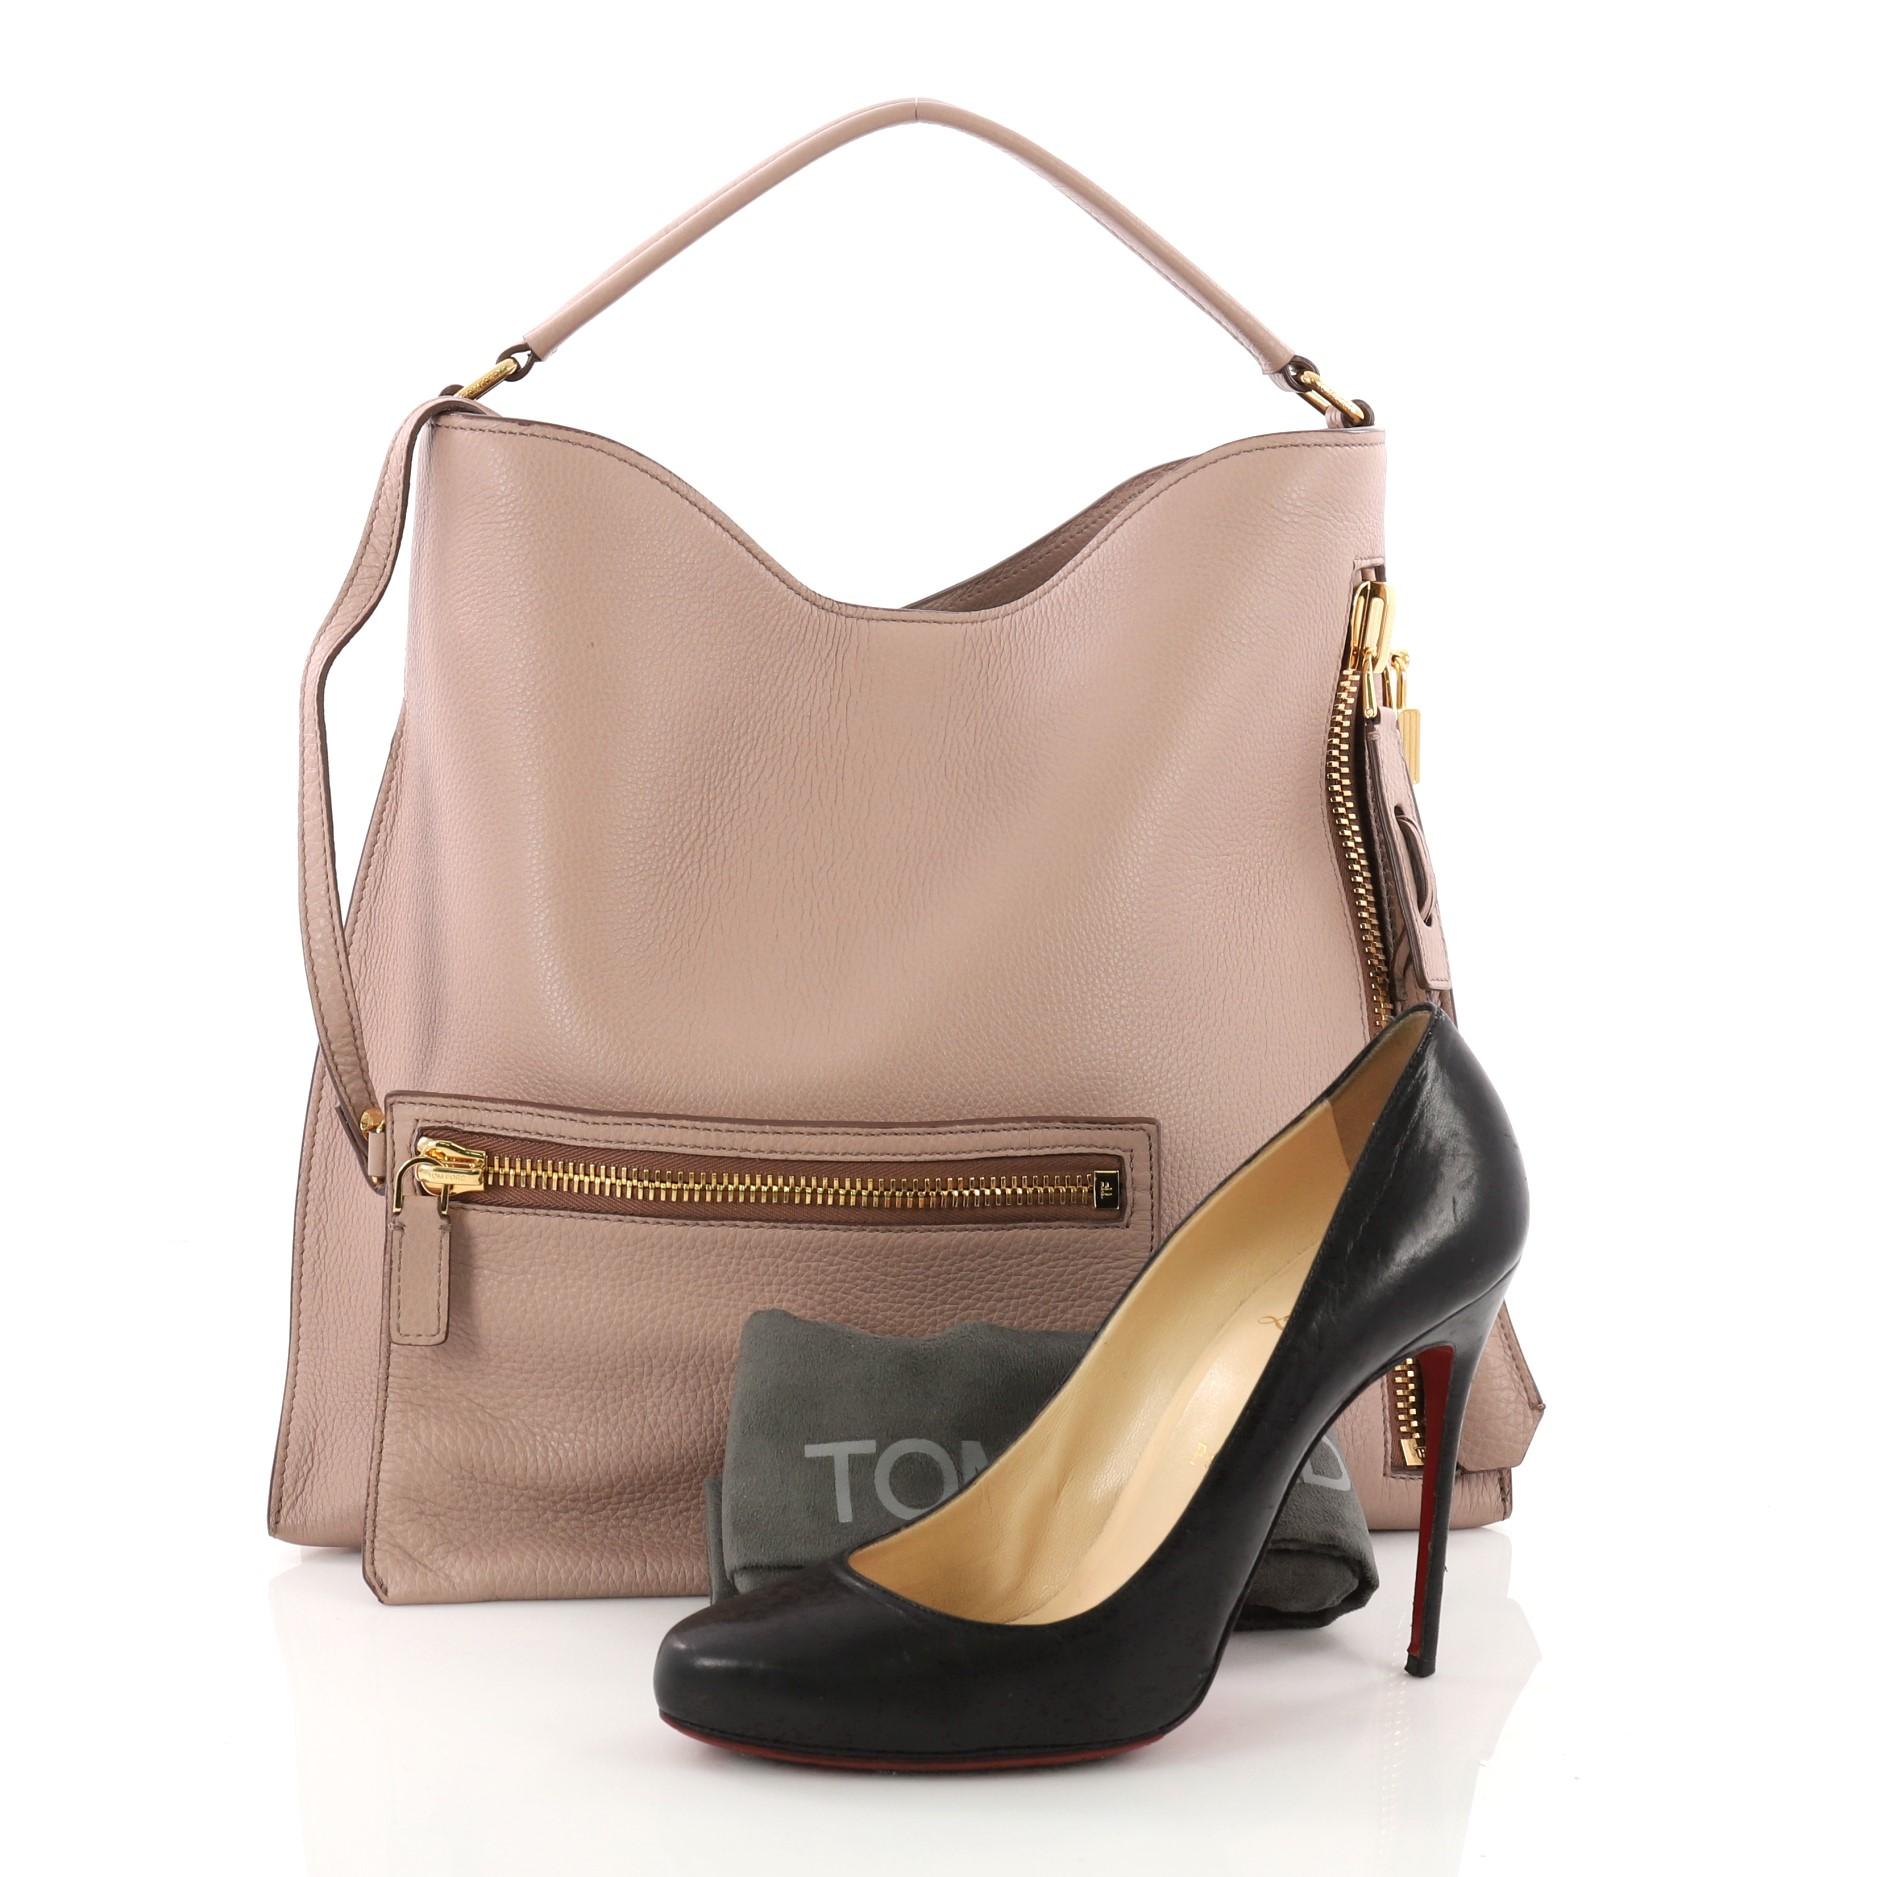 This authentic Tom Ford Alix Hobo Leather Small showcases a minimalist, clean and functional accessory perfect for the modern woman. Constructed in rose leather, this tote features a looping top handle, exterior zip pocket, padlock on pull tab, and